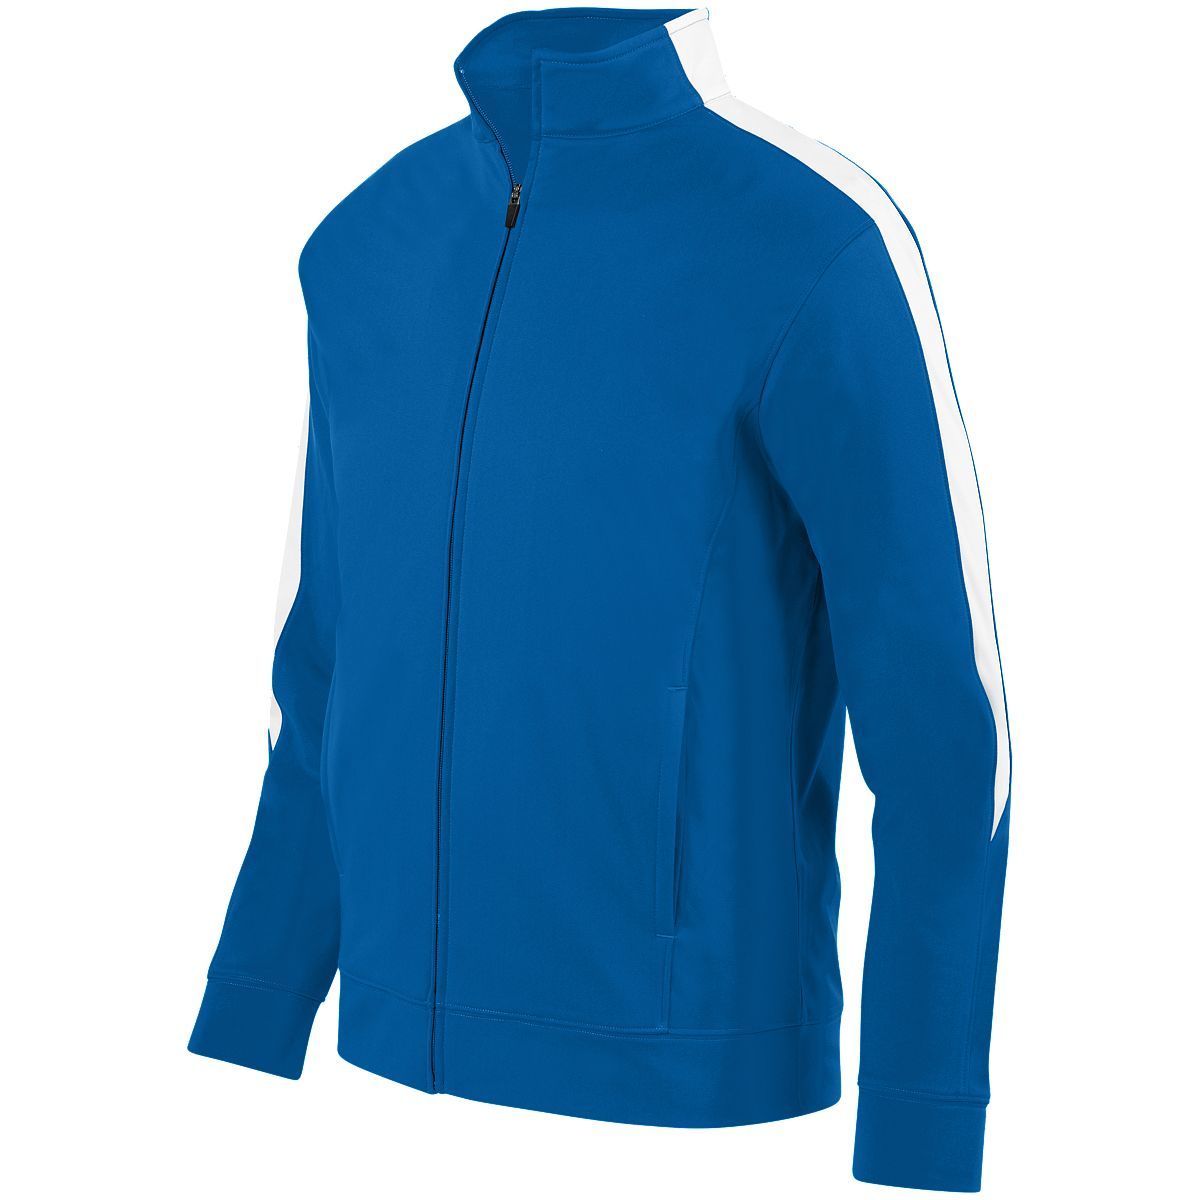 Augusta Sportswear Medalist Jacket 2.0 in Royal/White  -Part of the Adult, Adult-Jacket, Augusta-Products, Outerwear product lines at KanaleyCreations.com